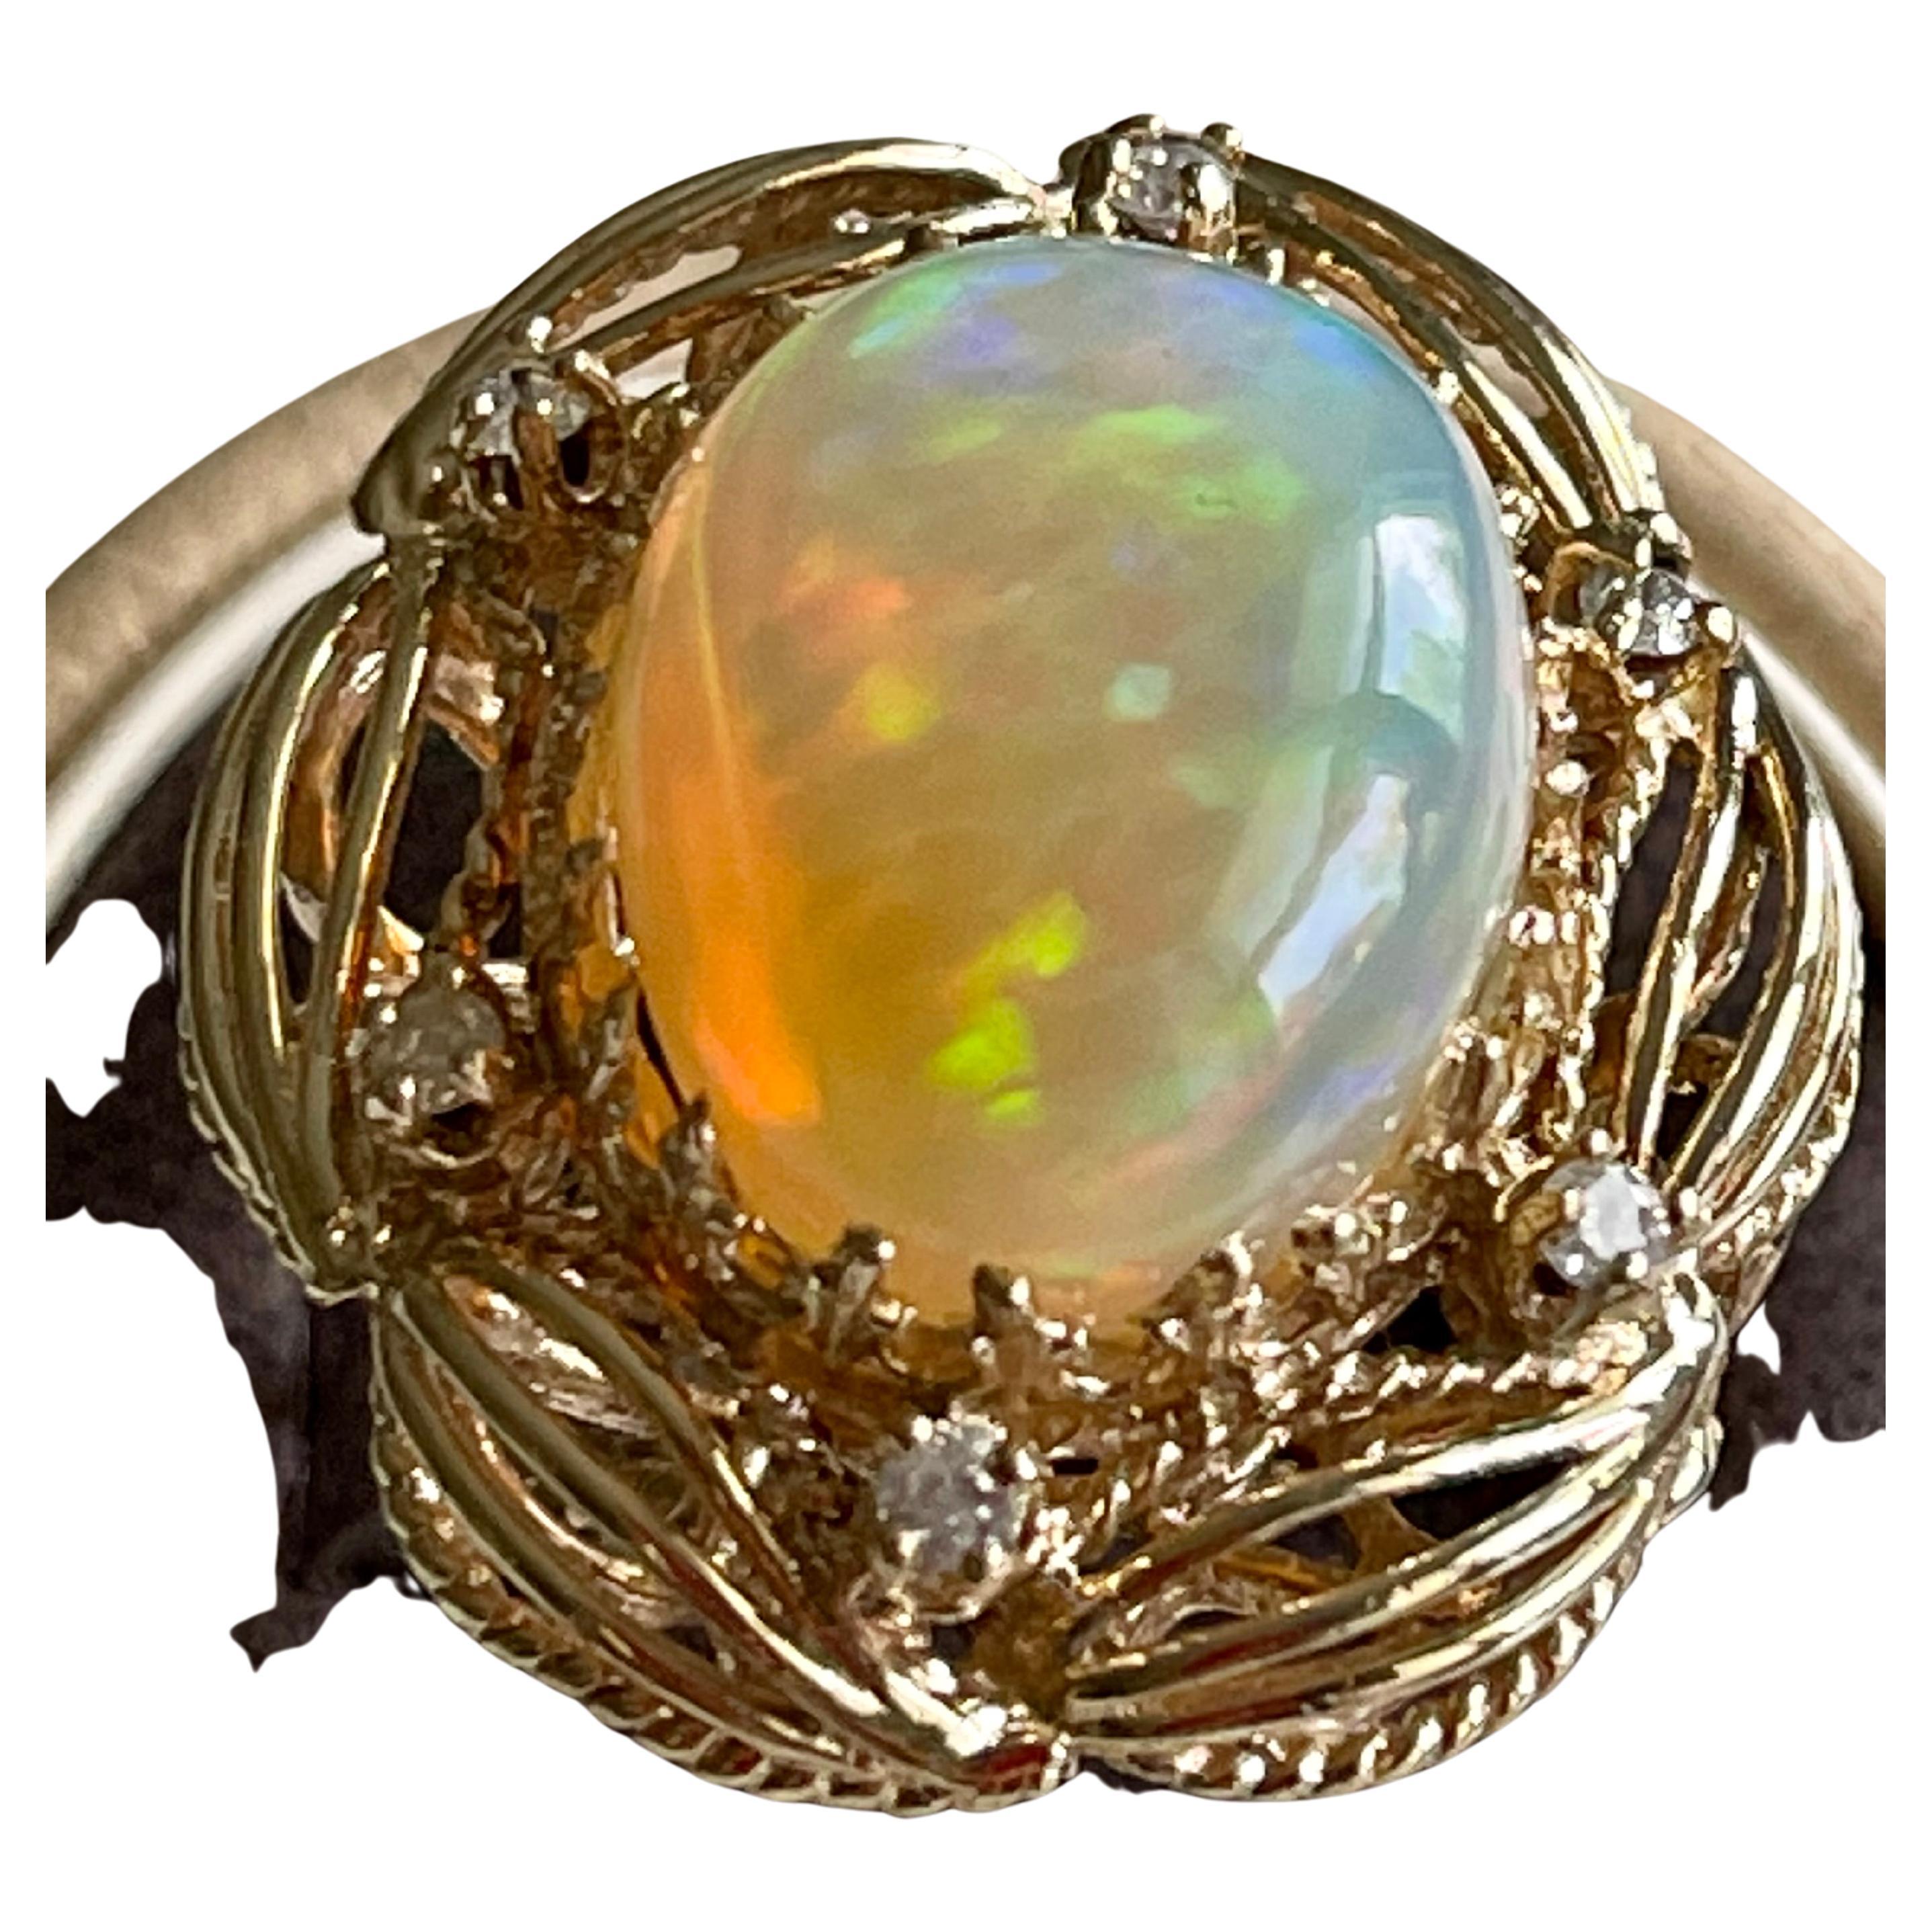 A Huge Cocktail ring 
Approximately 15 Carat Oval Ethiopian Opal  & Diamond Ring 14 Karat Yellow Gold Size 7
This spectacular Ring consisting of a single Oval Shape Ethiopian Opal Approximately 15 Carat. 

very clean Stone no inclusion , full of